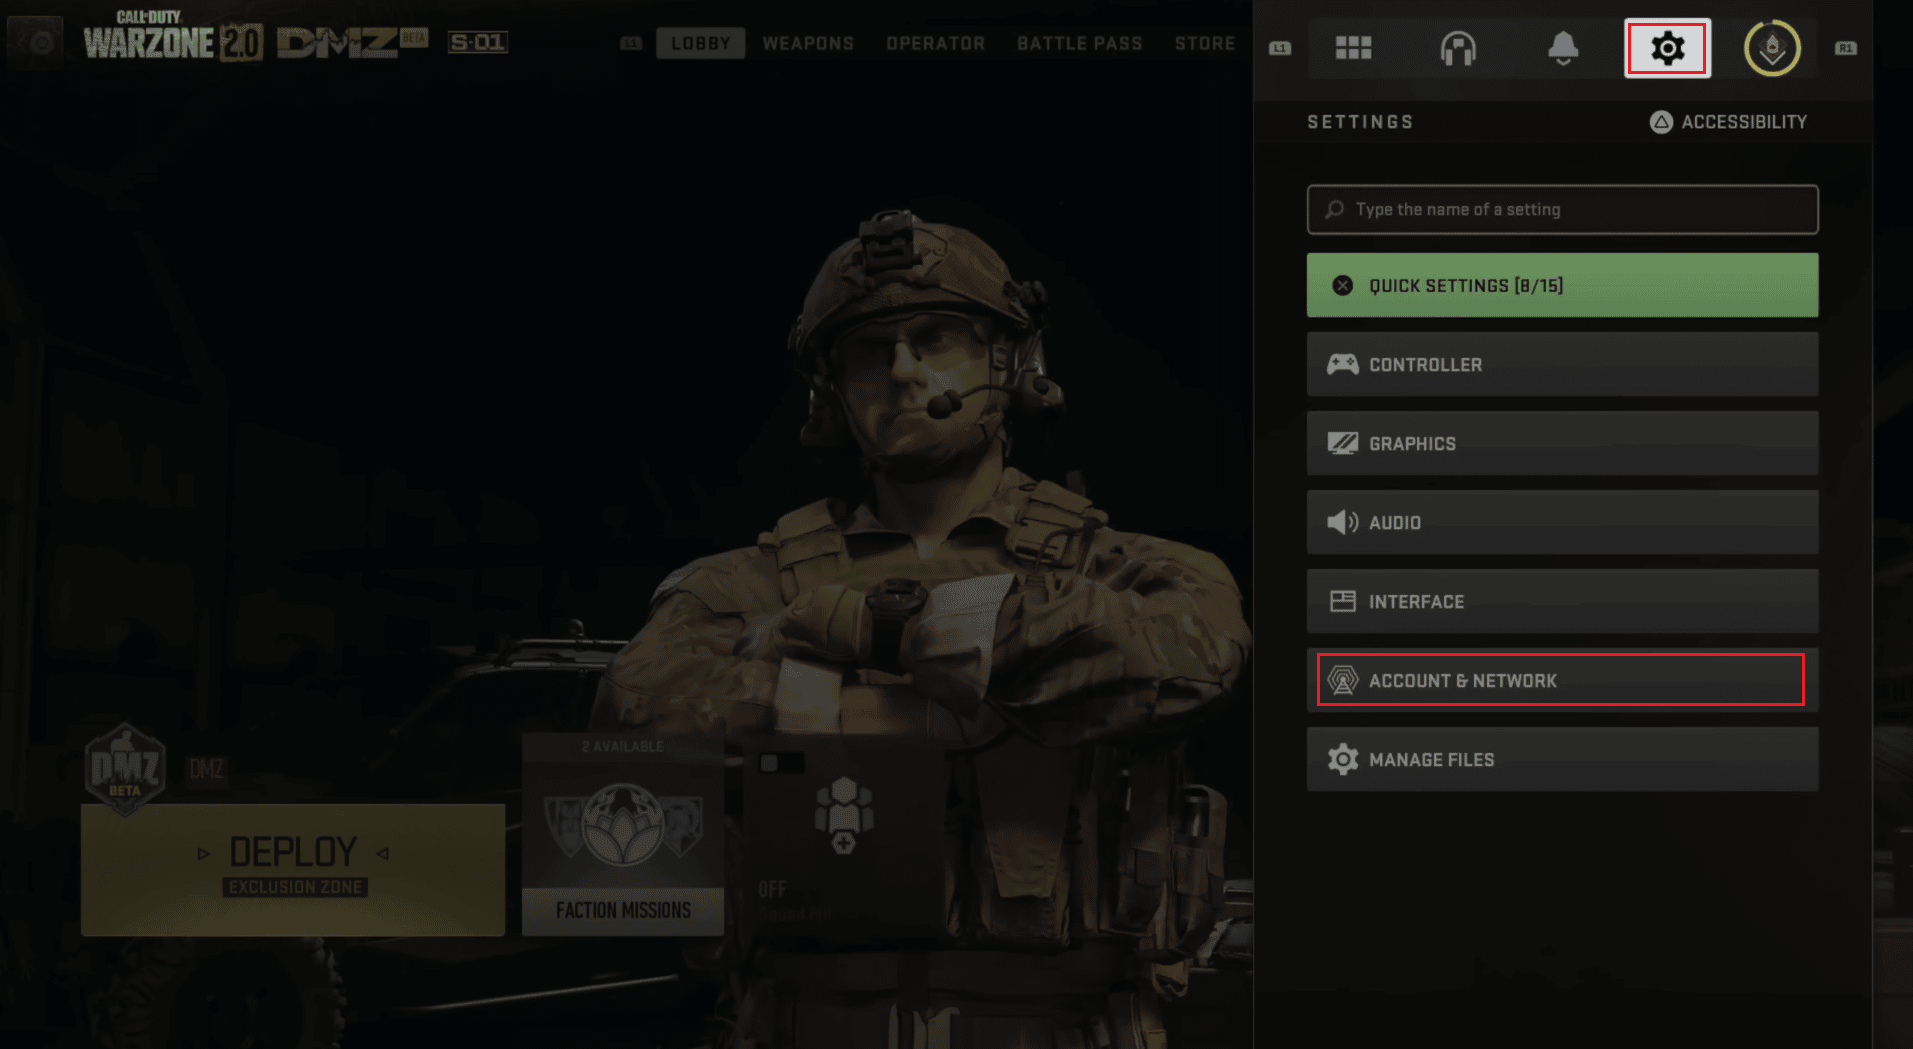 select the Settings gear tab - ACCOUNT & NETWORK option